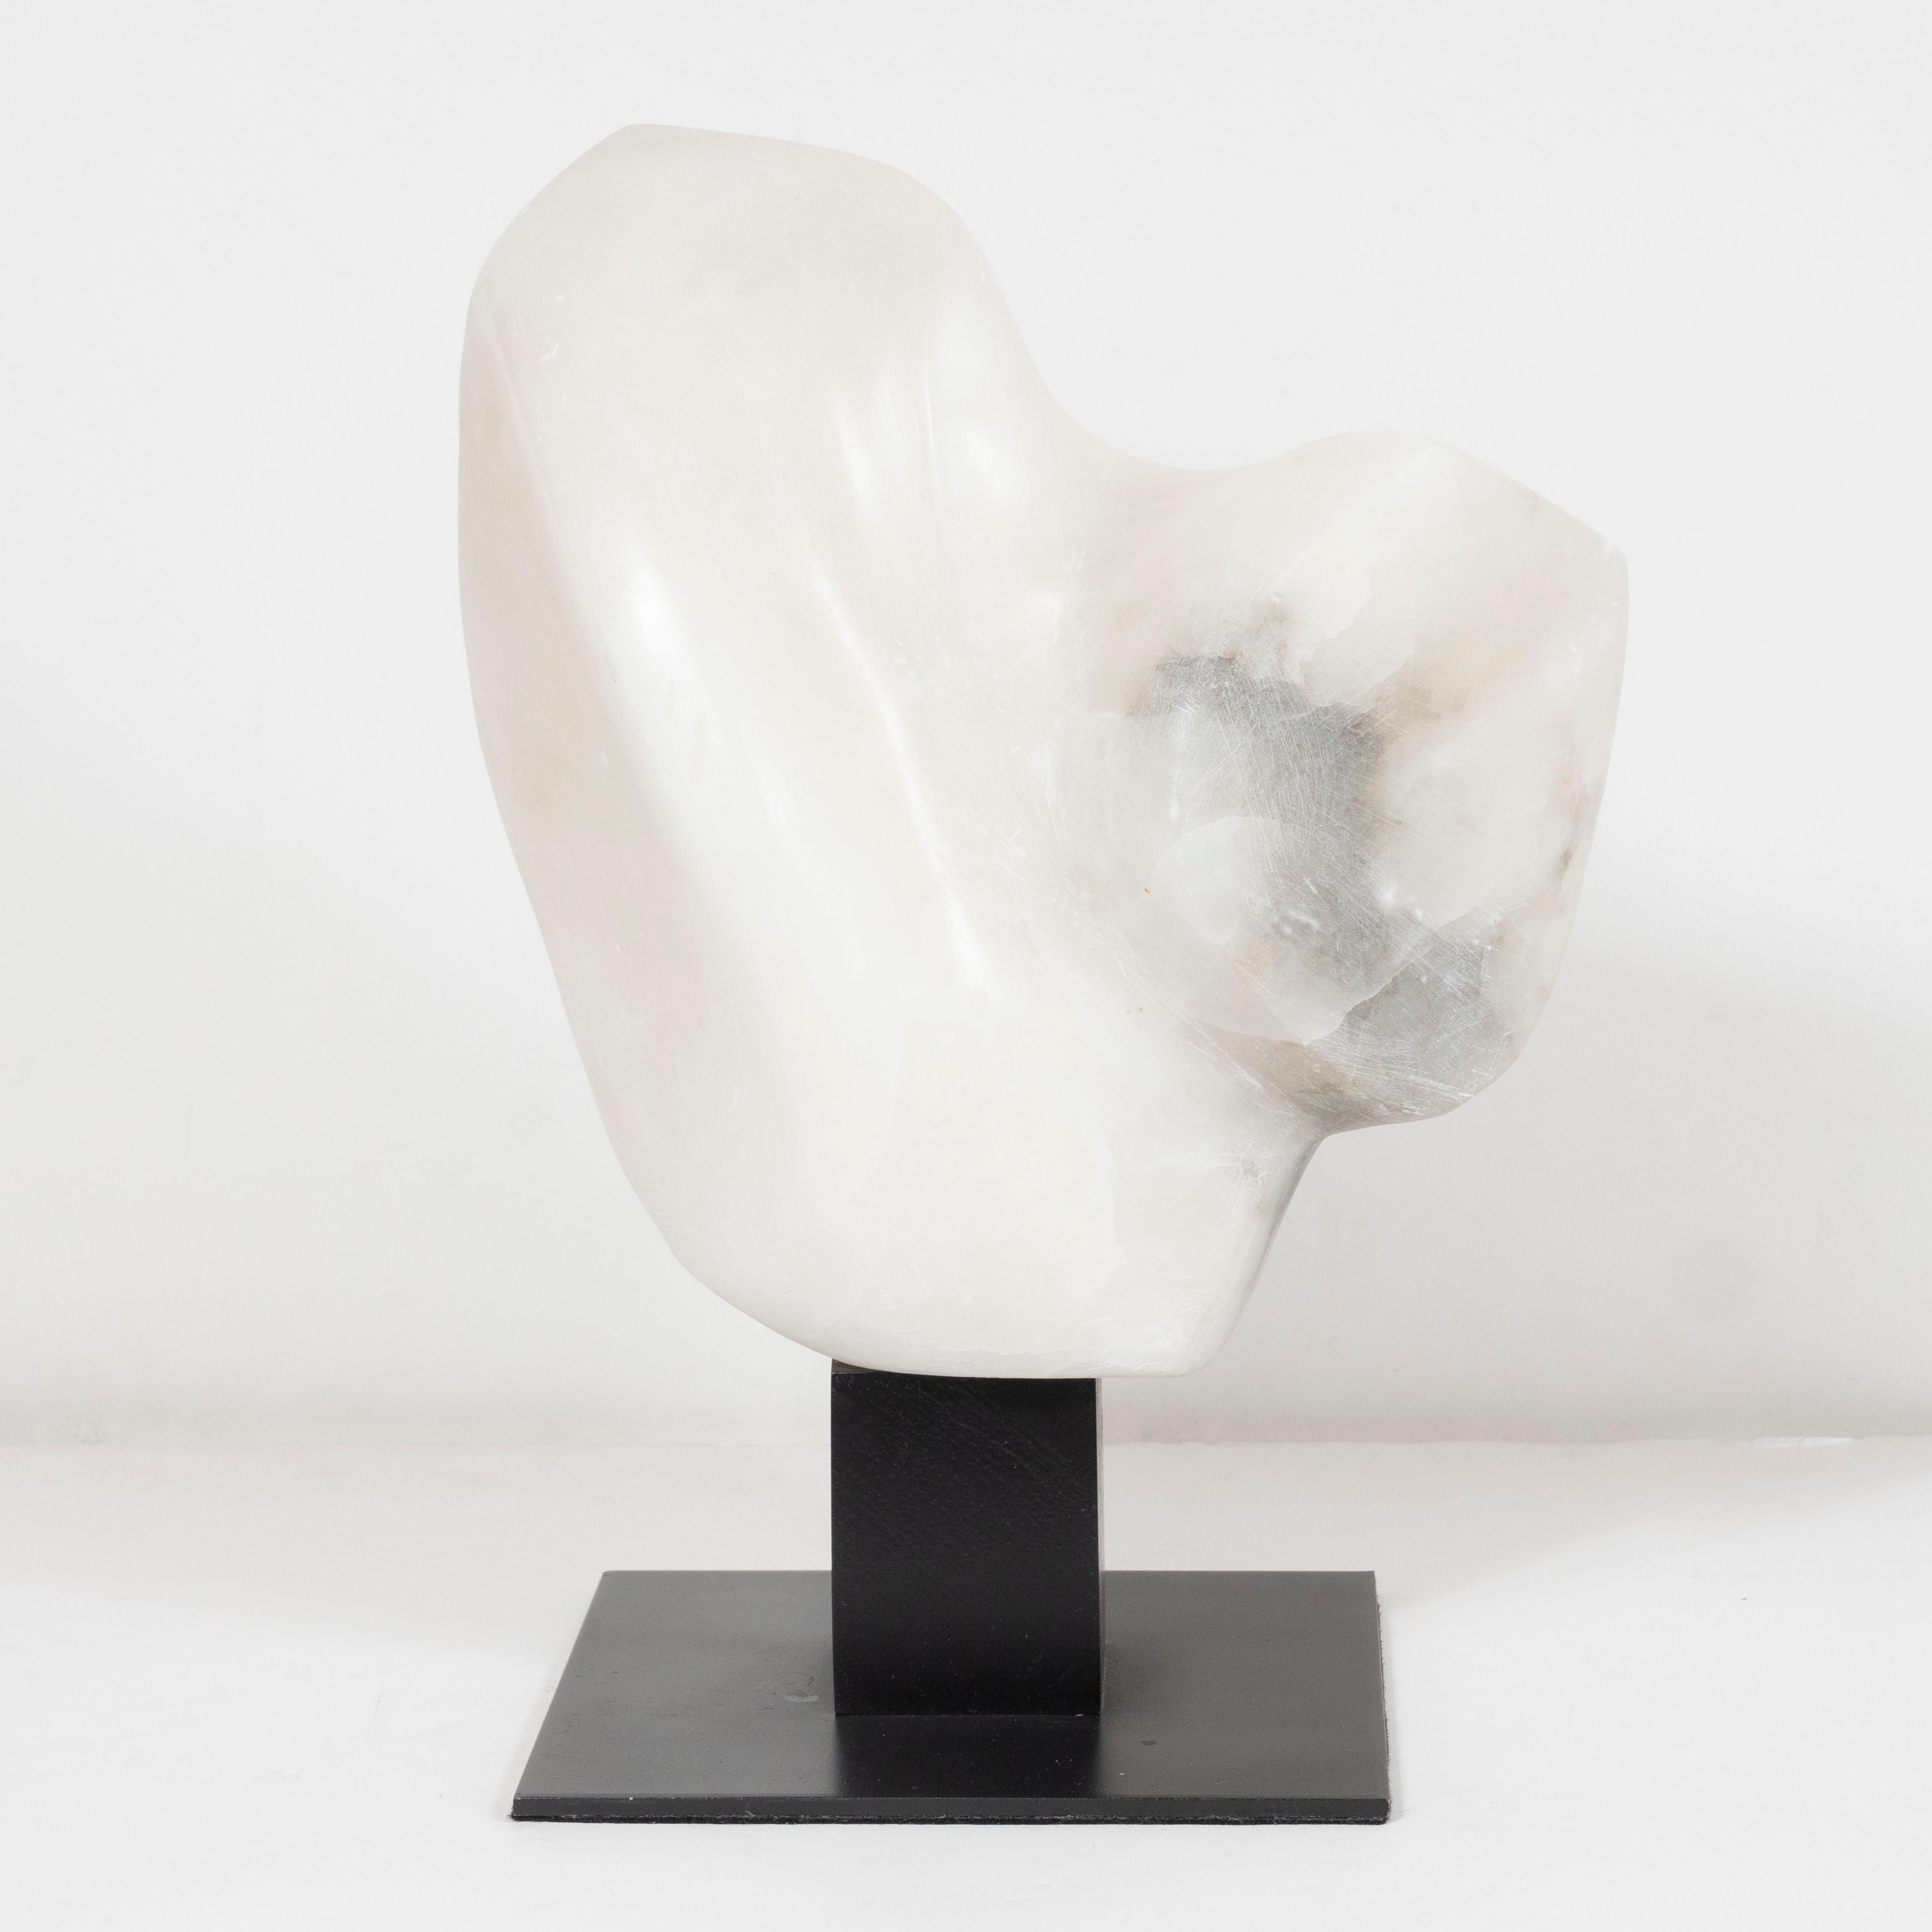 This refined marble sculpture was realized in the United States circa 1960. It features an amorphic organic form carved from a single piece of White marble. With its unblemished surface and clean modernist lines, this piece would be a winning